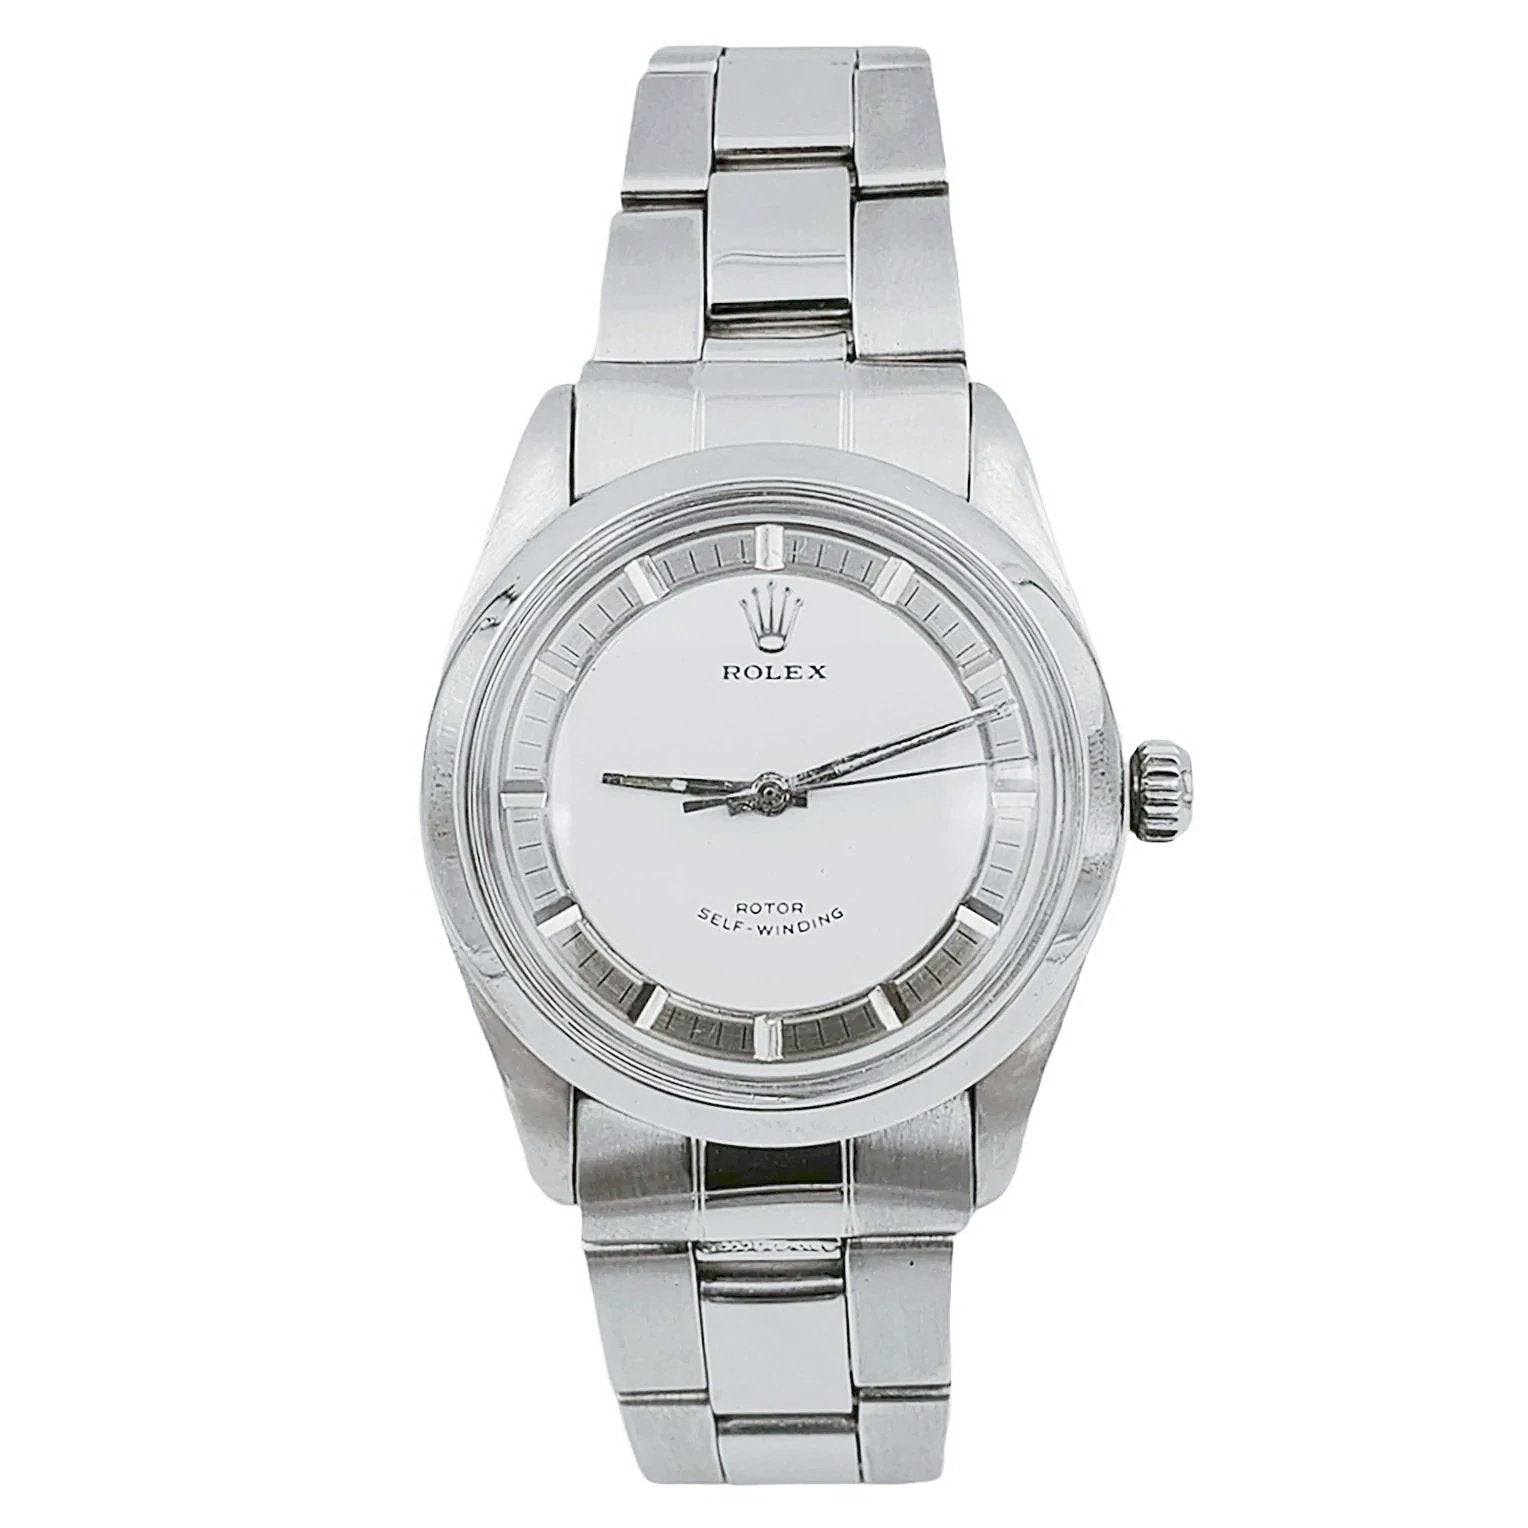 Men's Tudor 34mm Vintage Oyster Prince Stainless Steel Wristwatch w/ White Tuxedo Custom Dial & Smooth Bezel. (Pre-Owned)